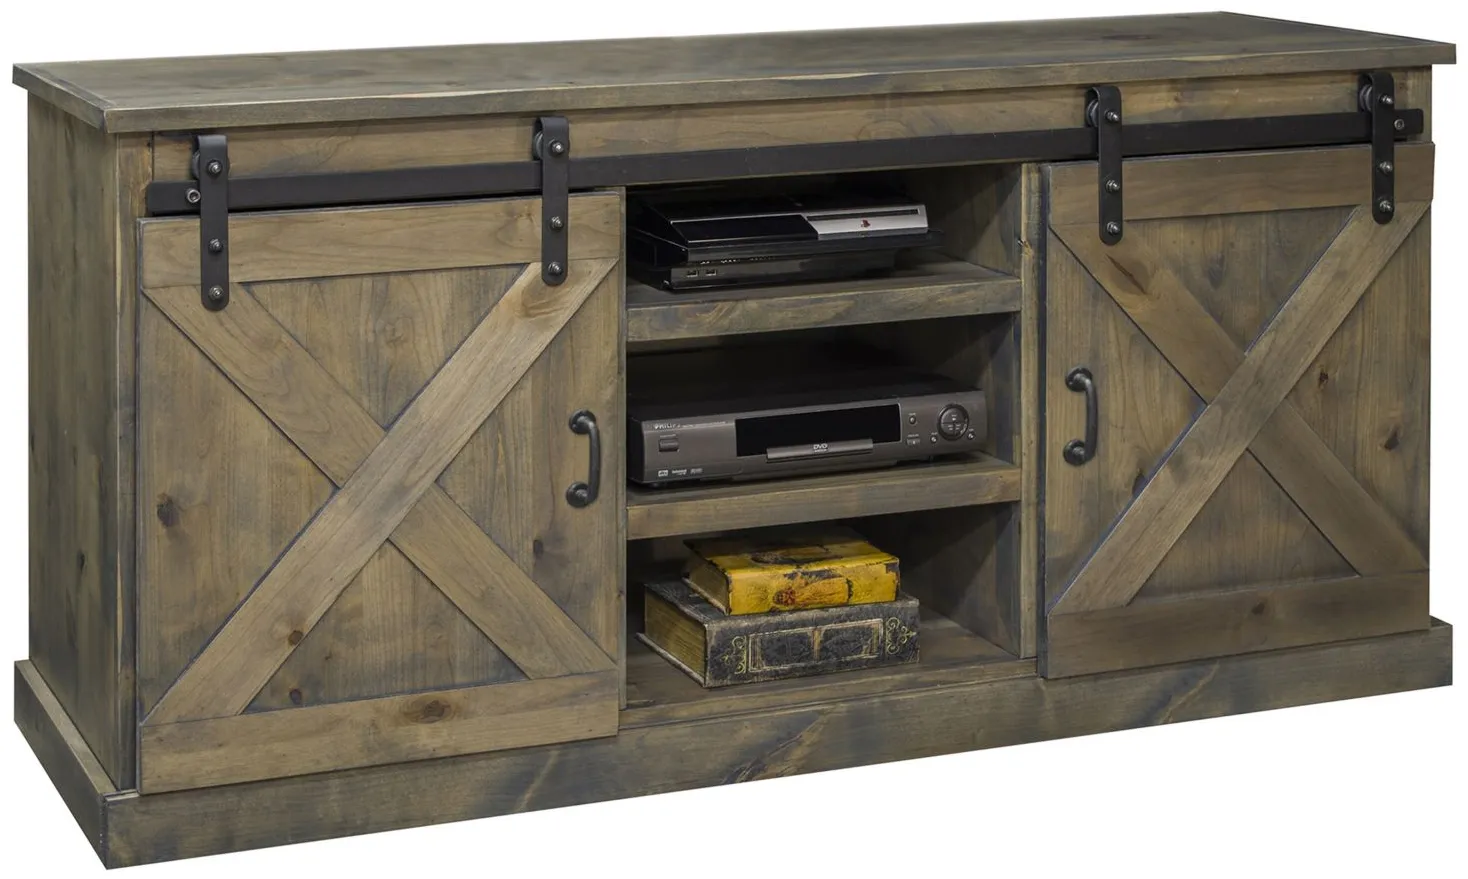 Farmhouse 66" TV Console in Barnwood by Legends Furniture